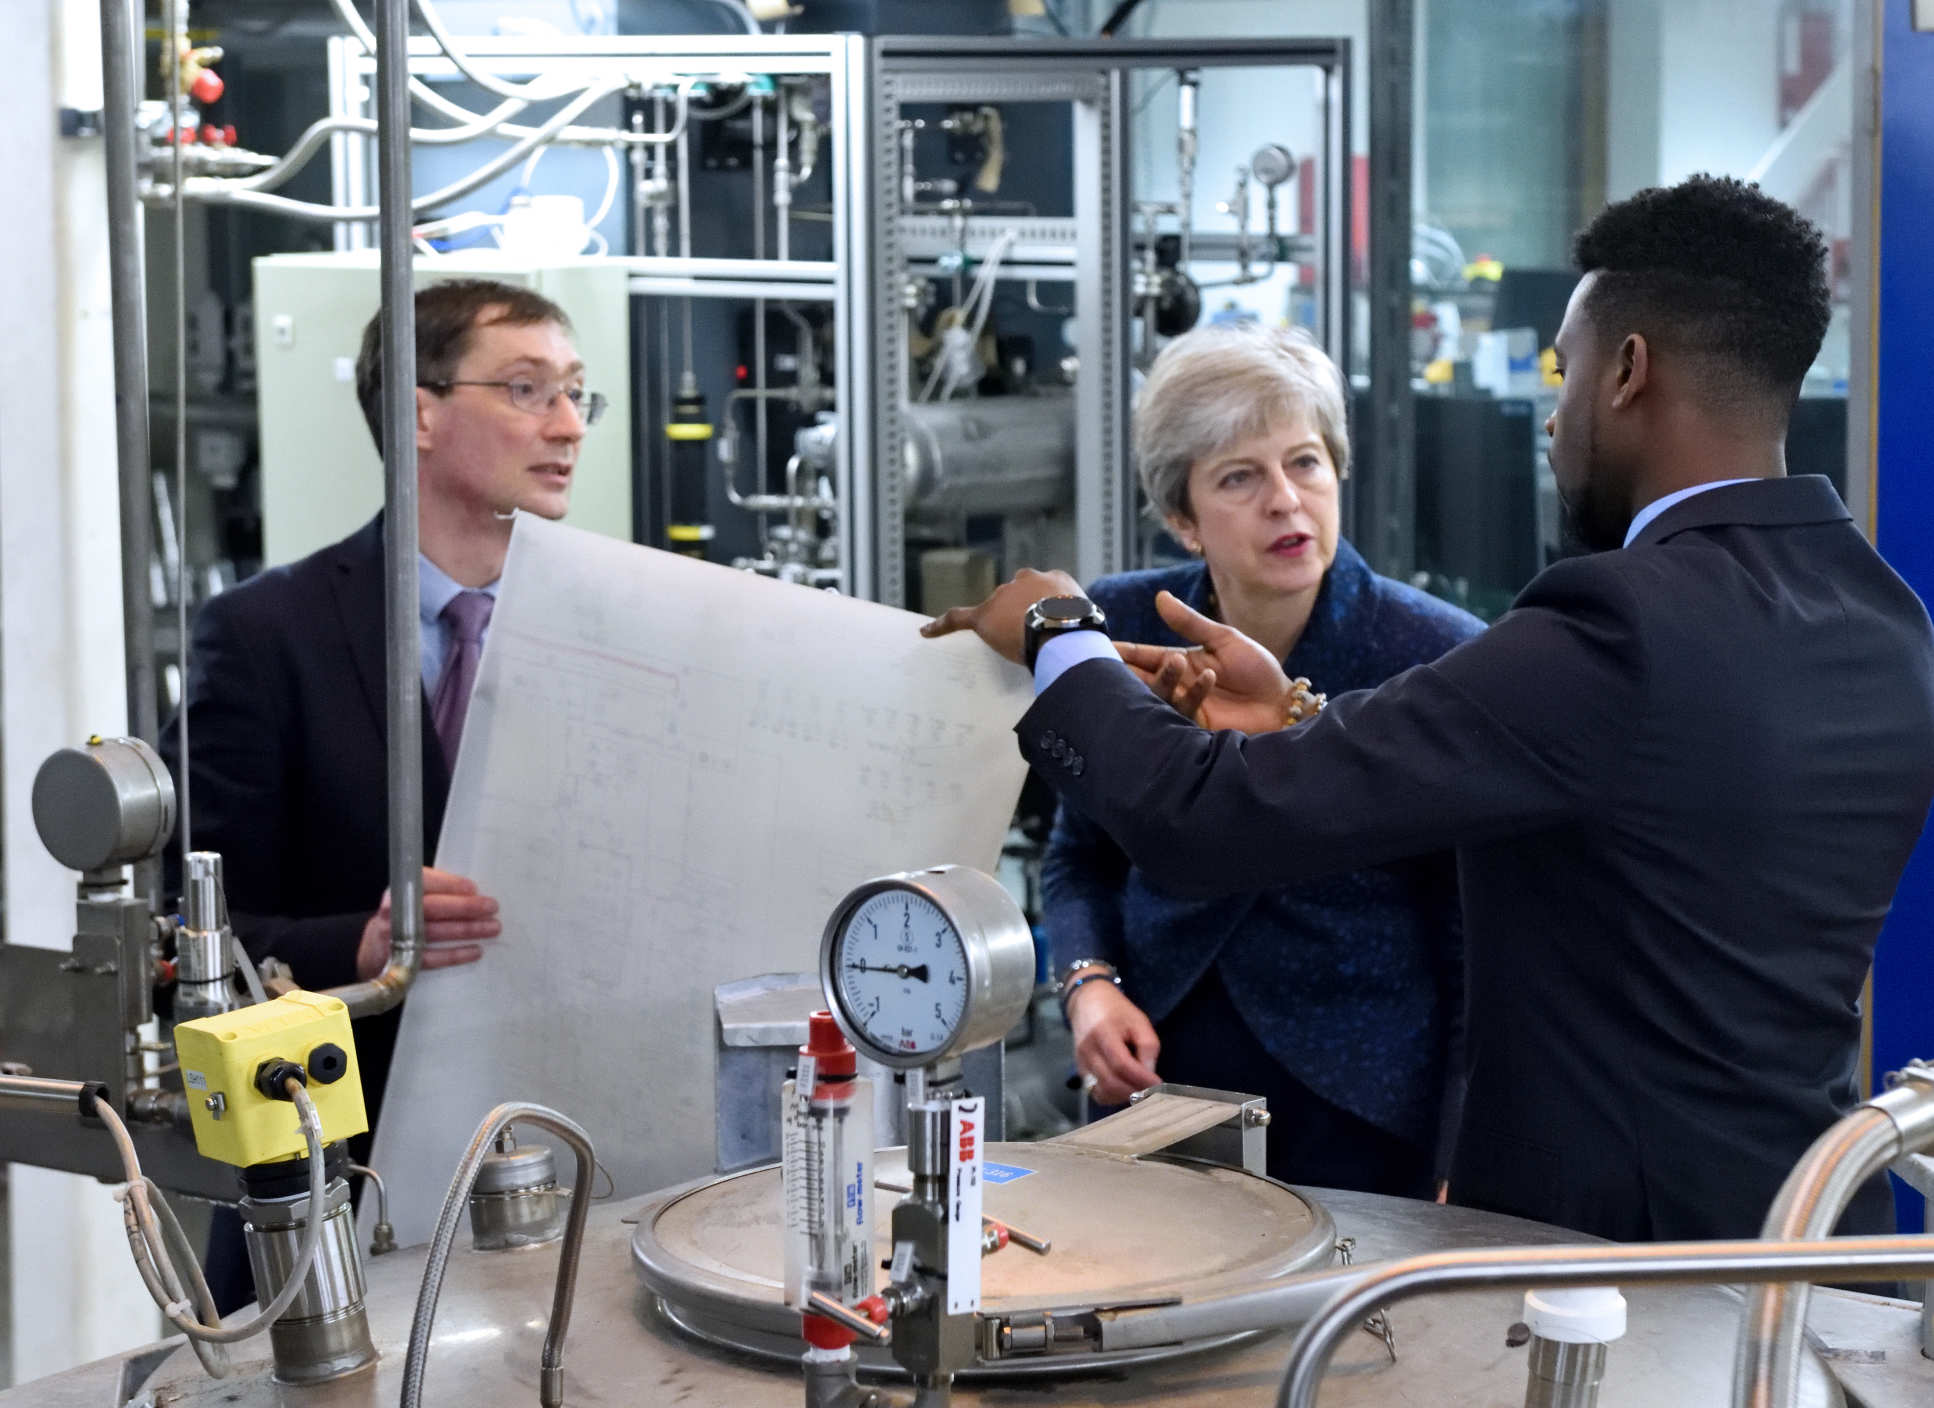 Undergraduate Ferdiand Agu and Dr Colin Hale showed the PM their work in carbon capture and storage